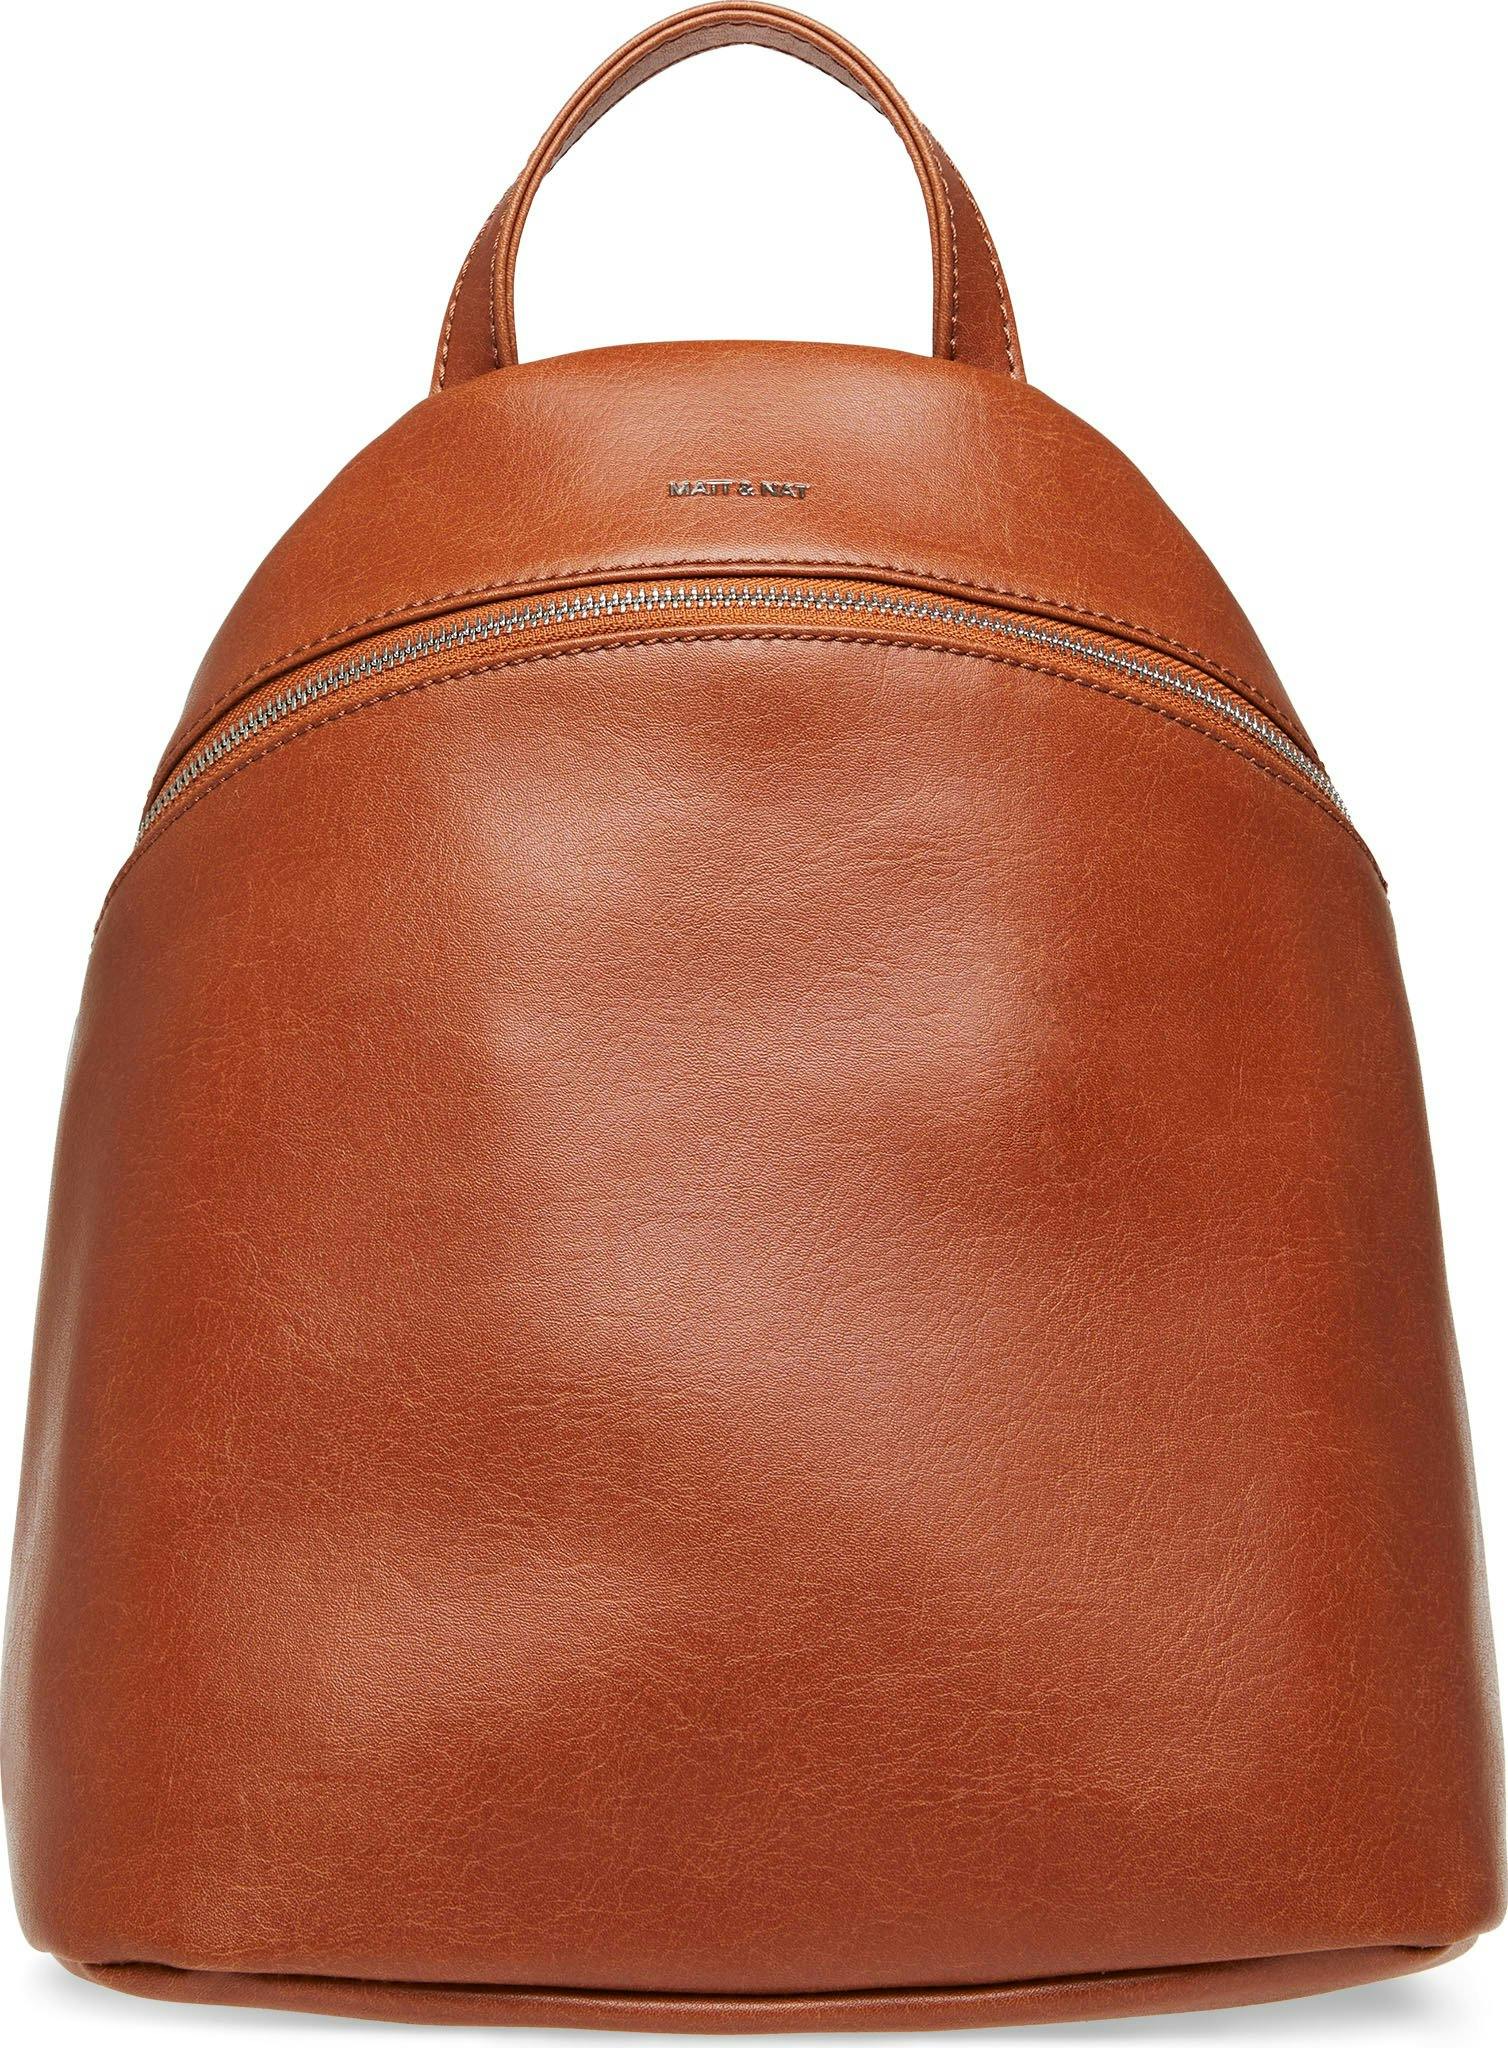 Product image for Aries Backpack - Vintage Collection 9L - Women's